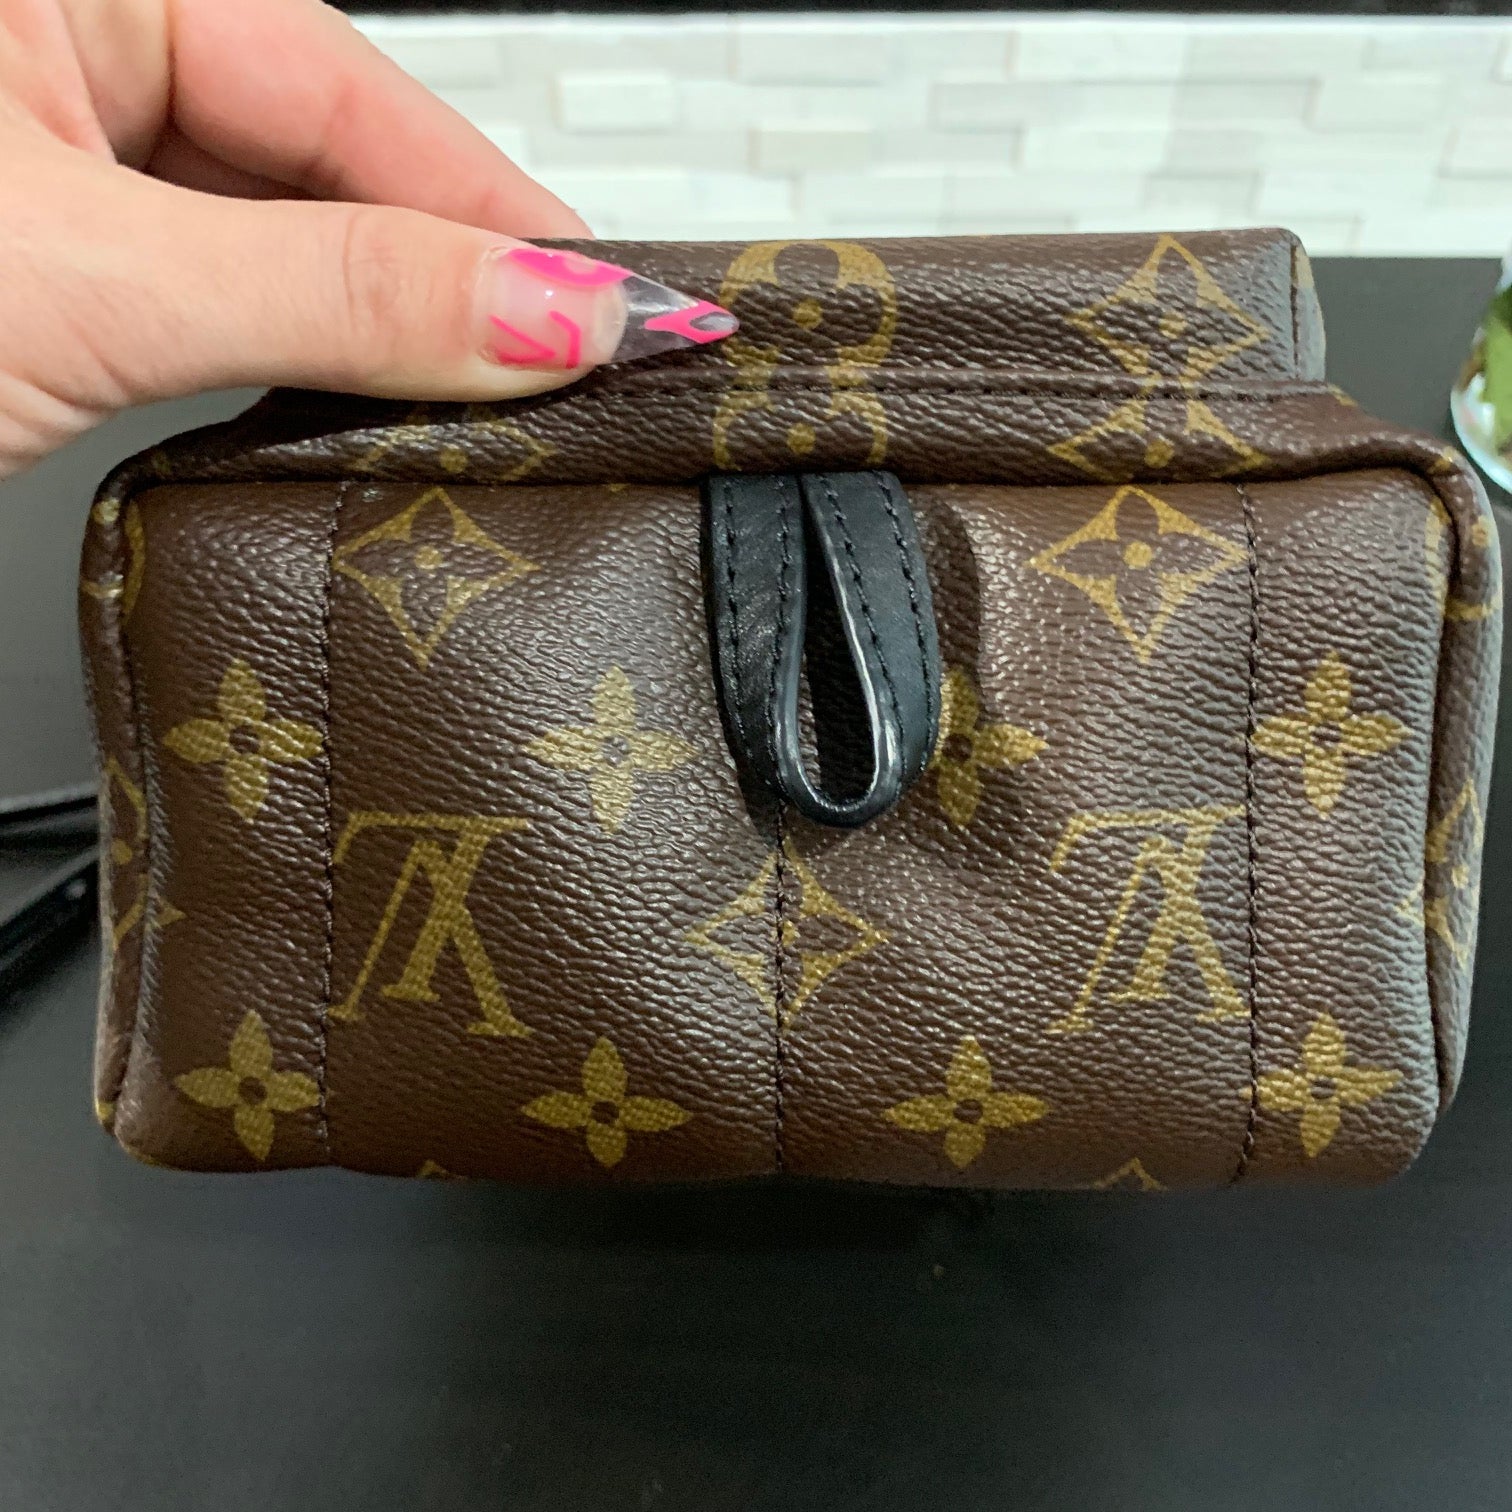 Louis Vuitton Palm Springs Backpack Fake Vs Real